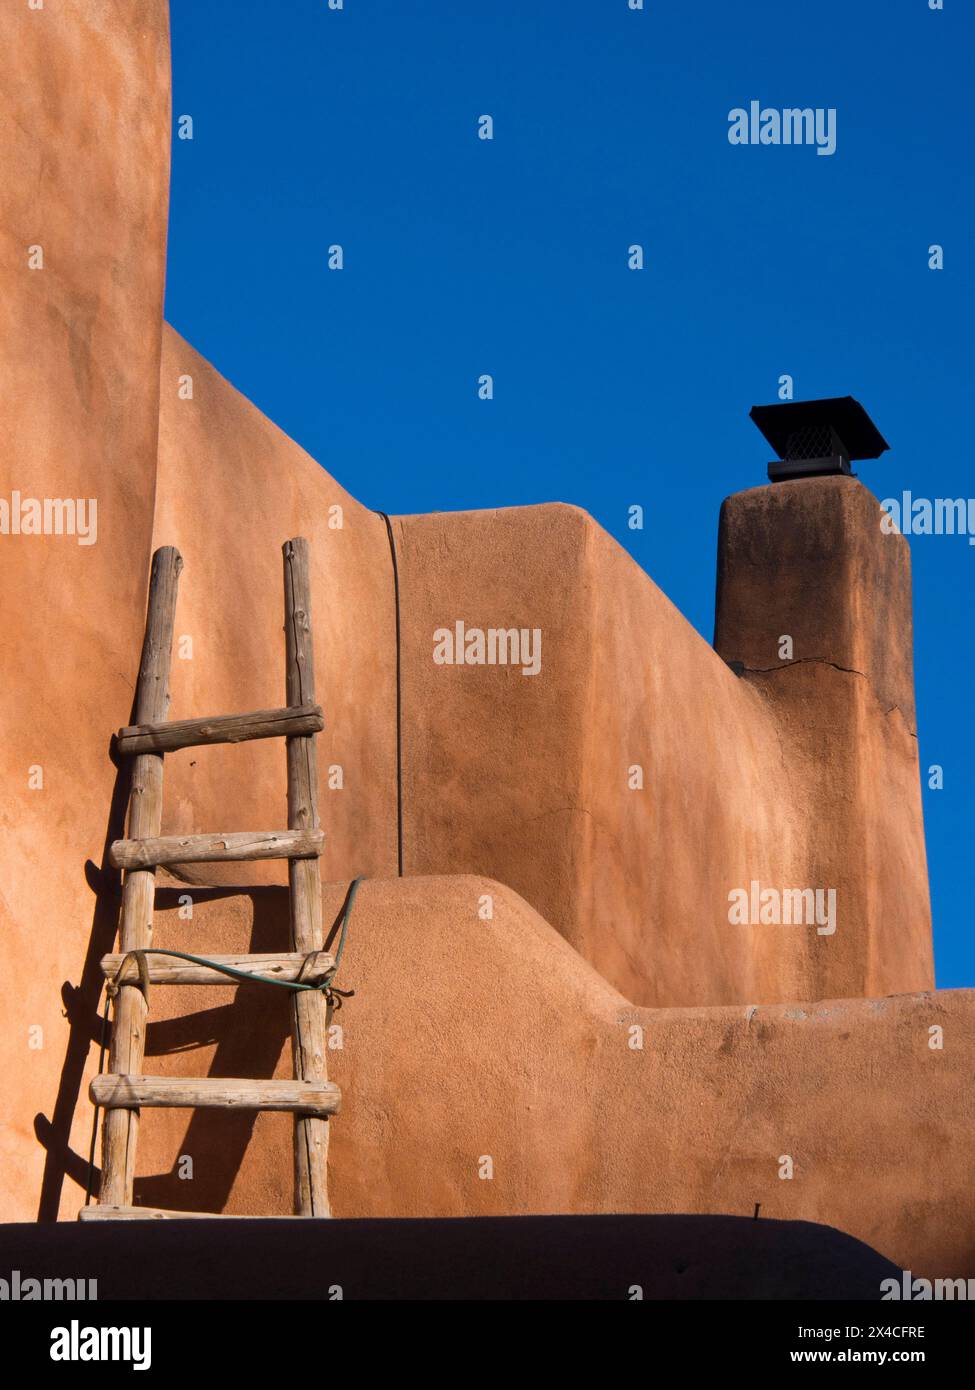 USA, New Mexico, Sante Fe. Southwest architecture, part of a earth colored adobe house in Santa Fe. Stock Photo